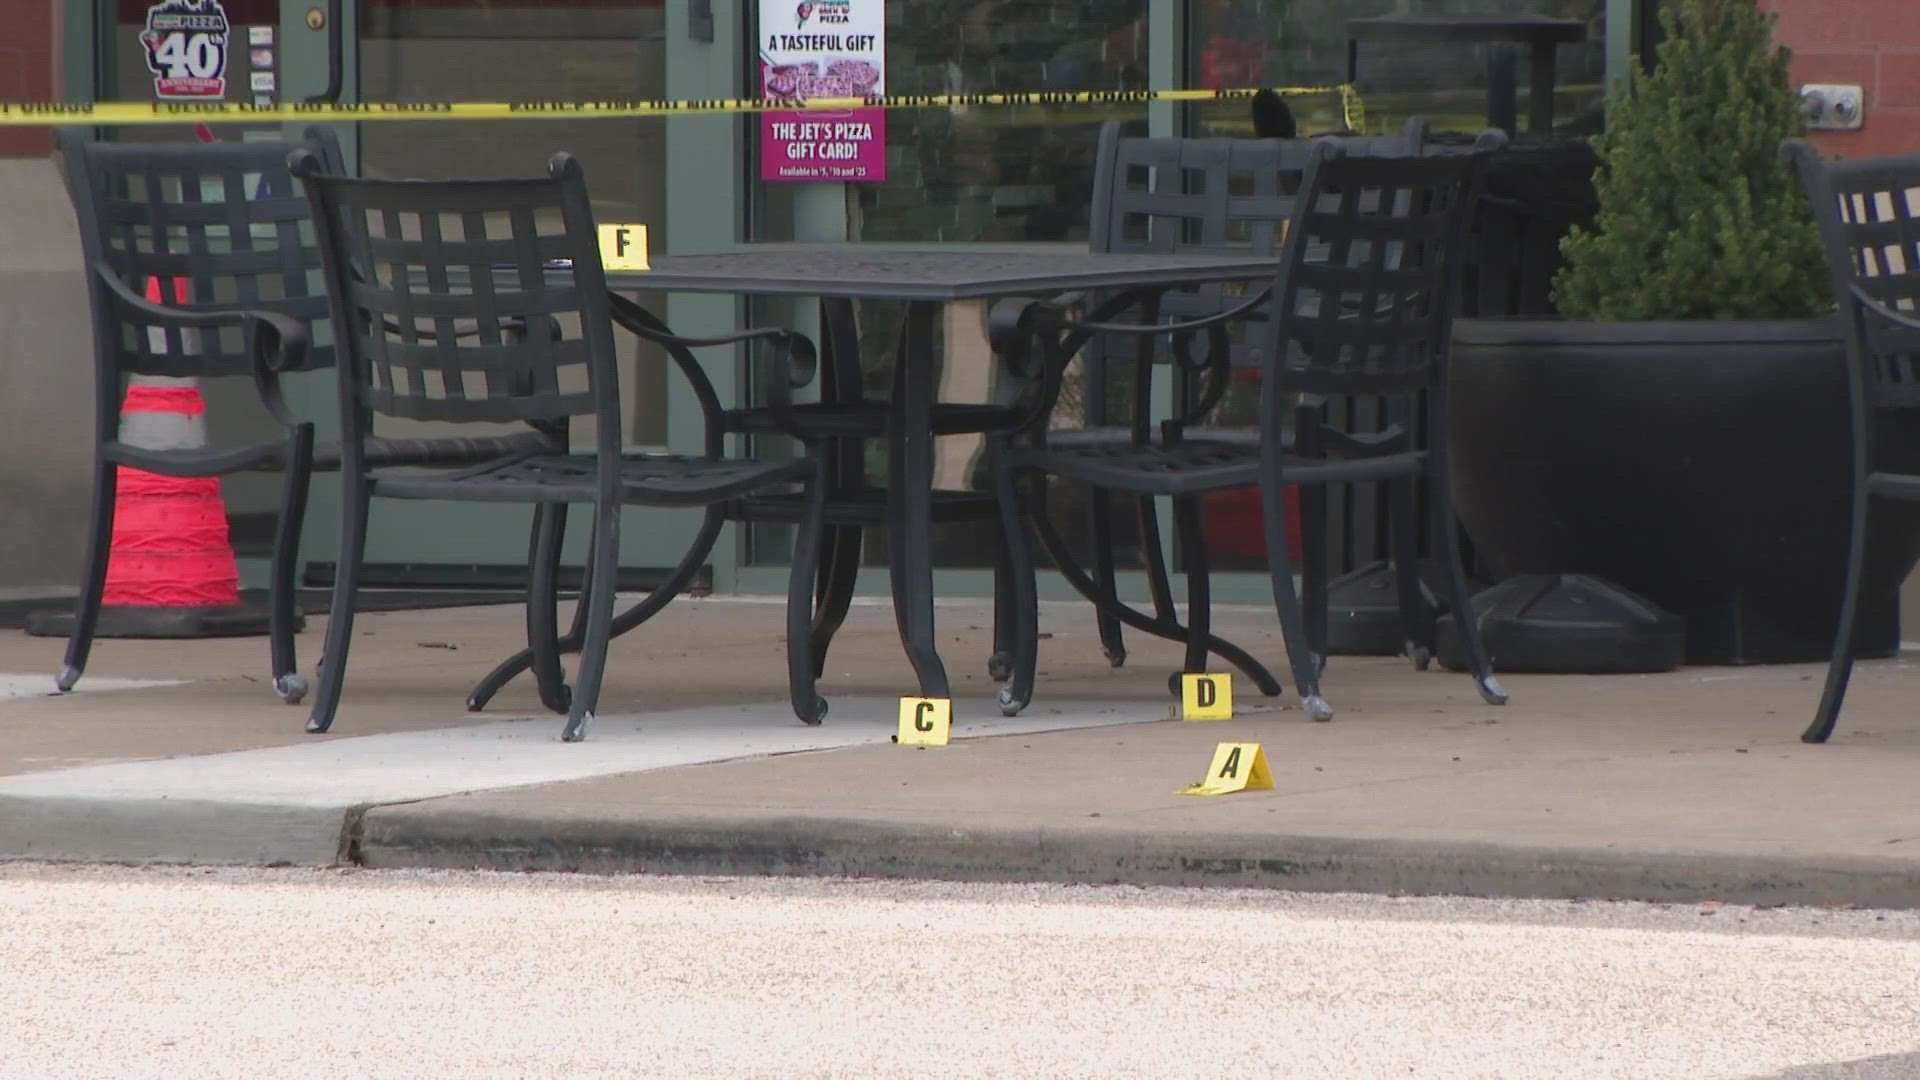 The shooting occurred outside Jet's Pizza located at 12536 Olive Boulevard. Creve Coeur police are investigating.